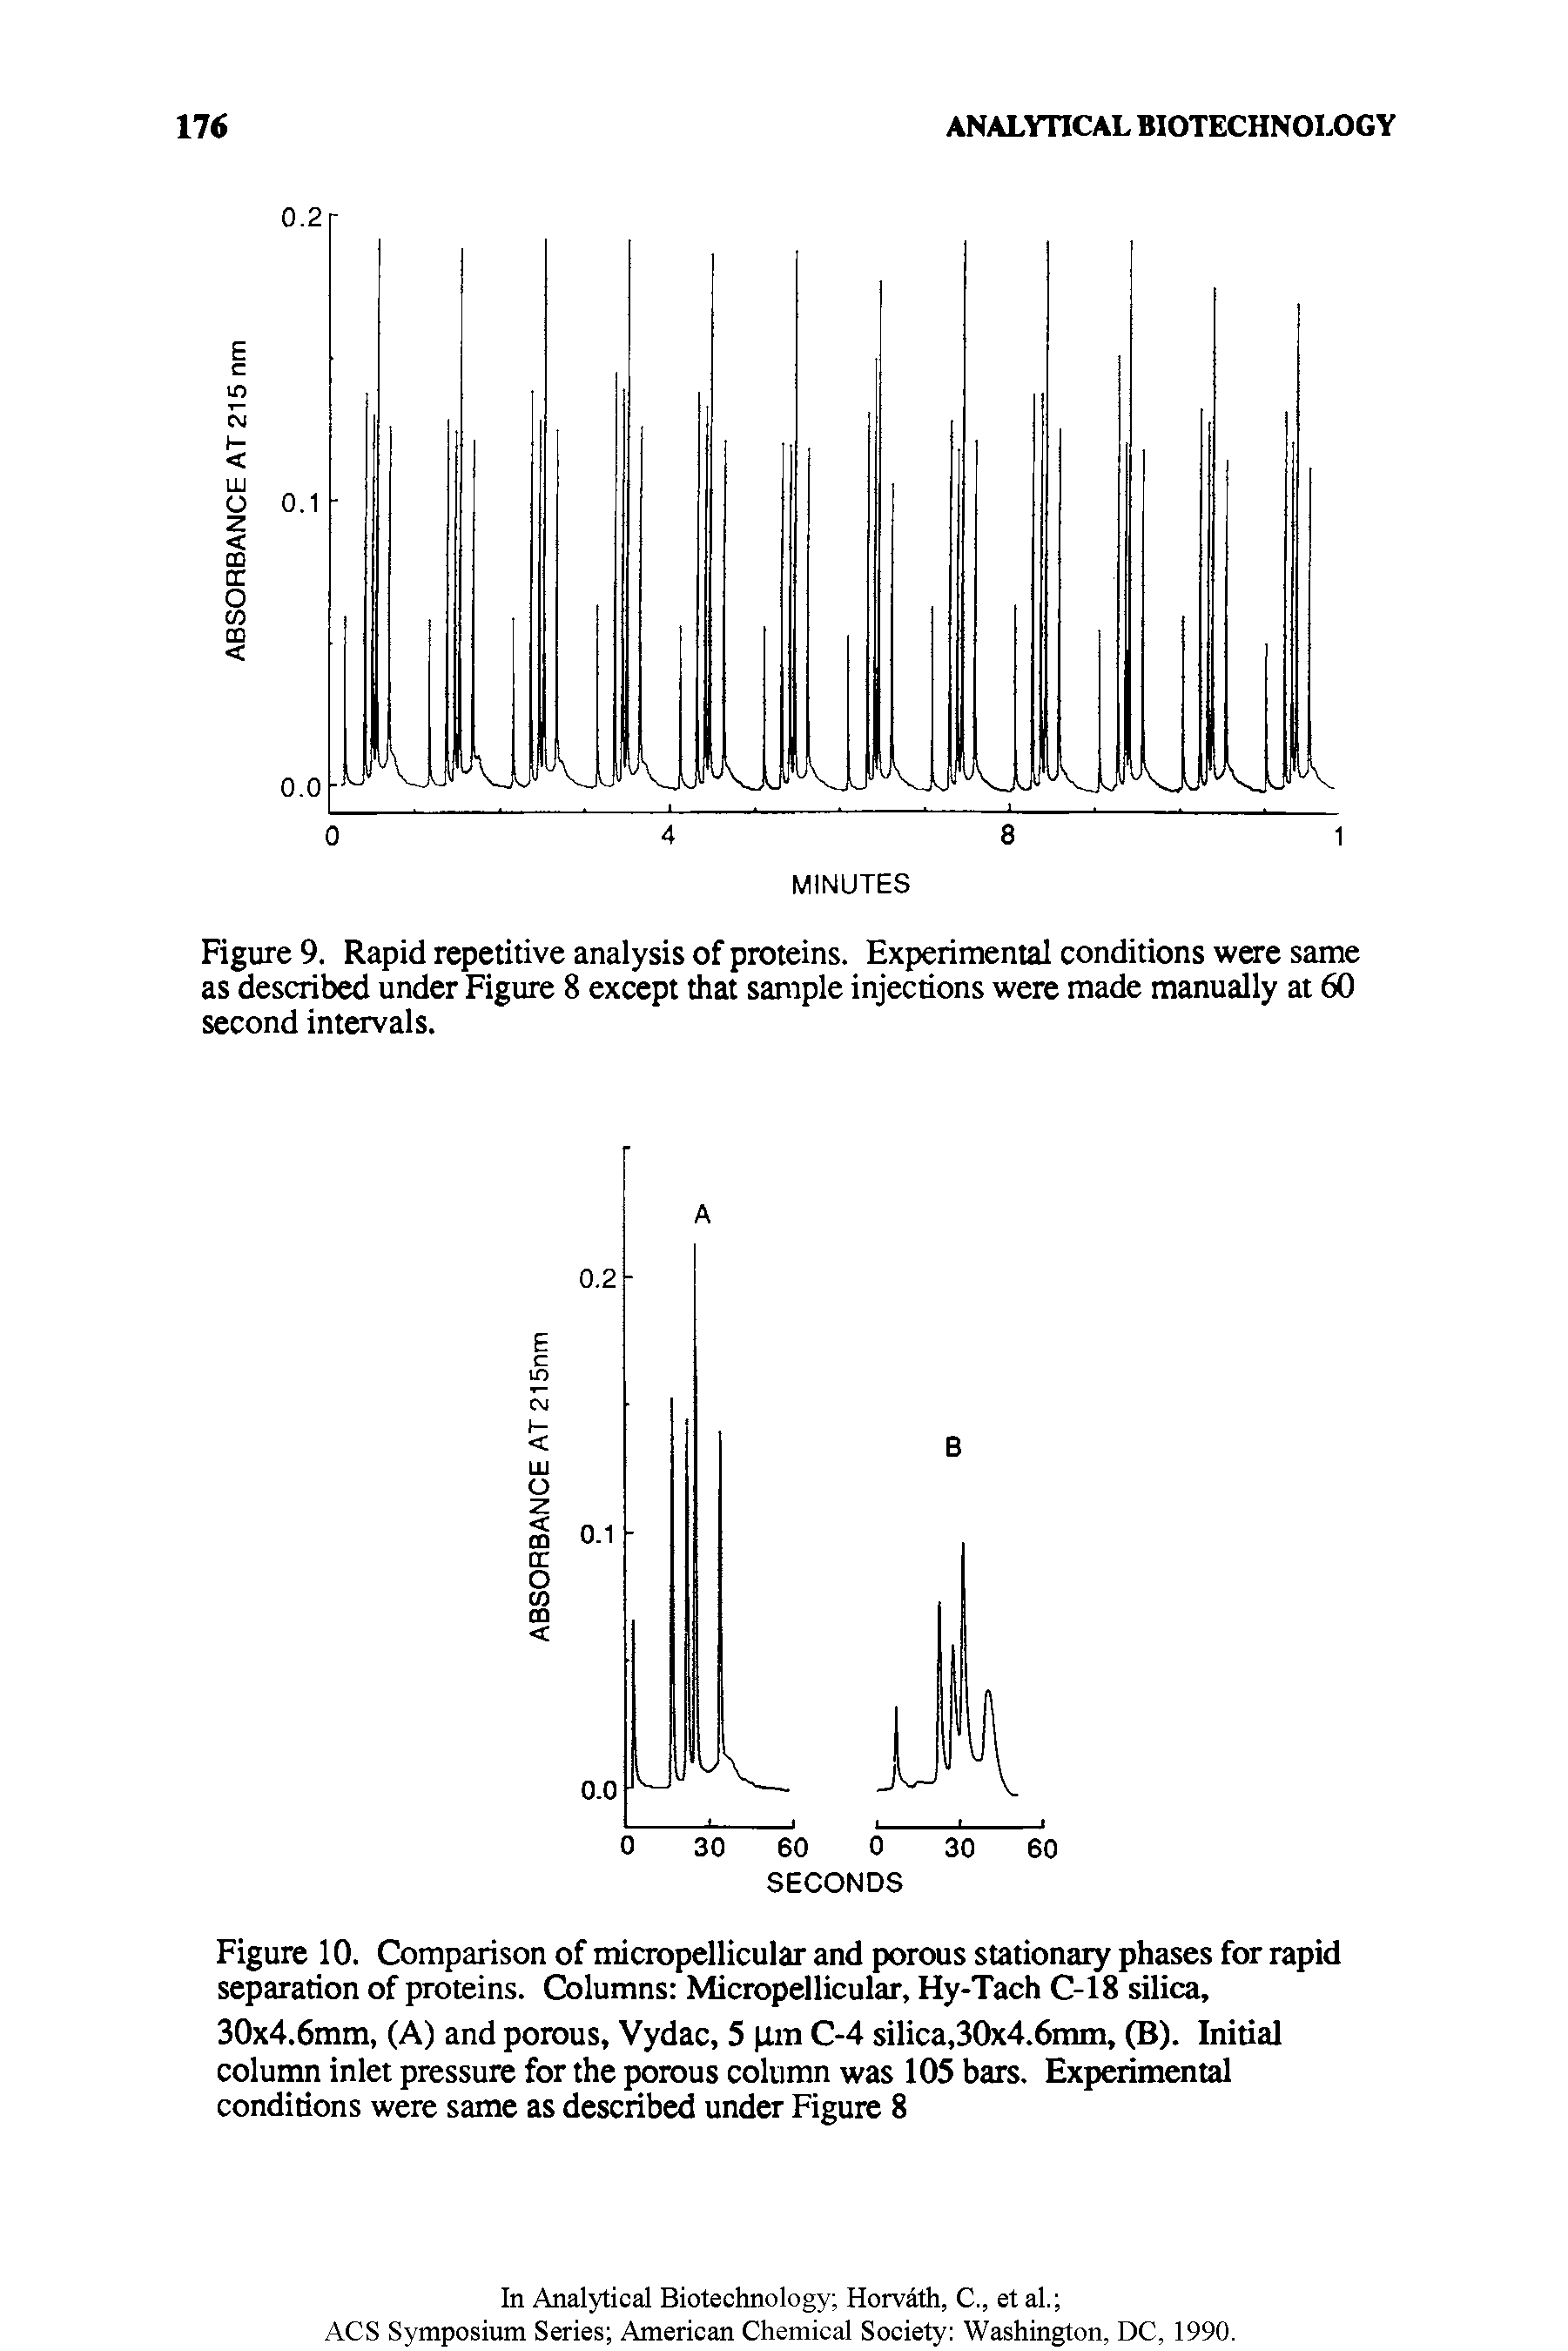 Figure 9. Rapid repetitive analysis of proteins. Experimental conditions were same as described under Figure 8 except that sample injections were made manually at 60 second intervals.